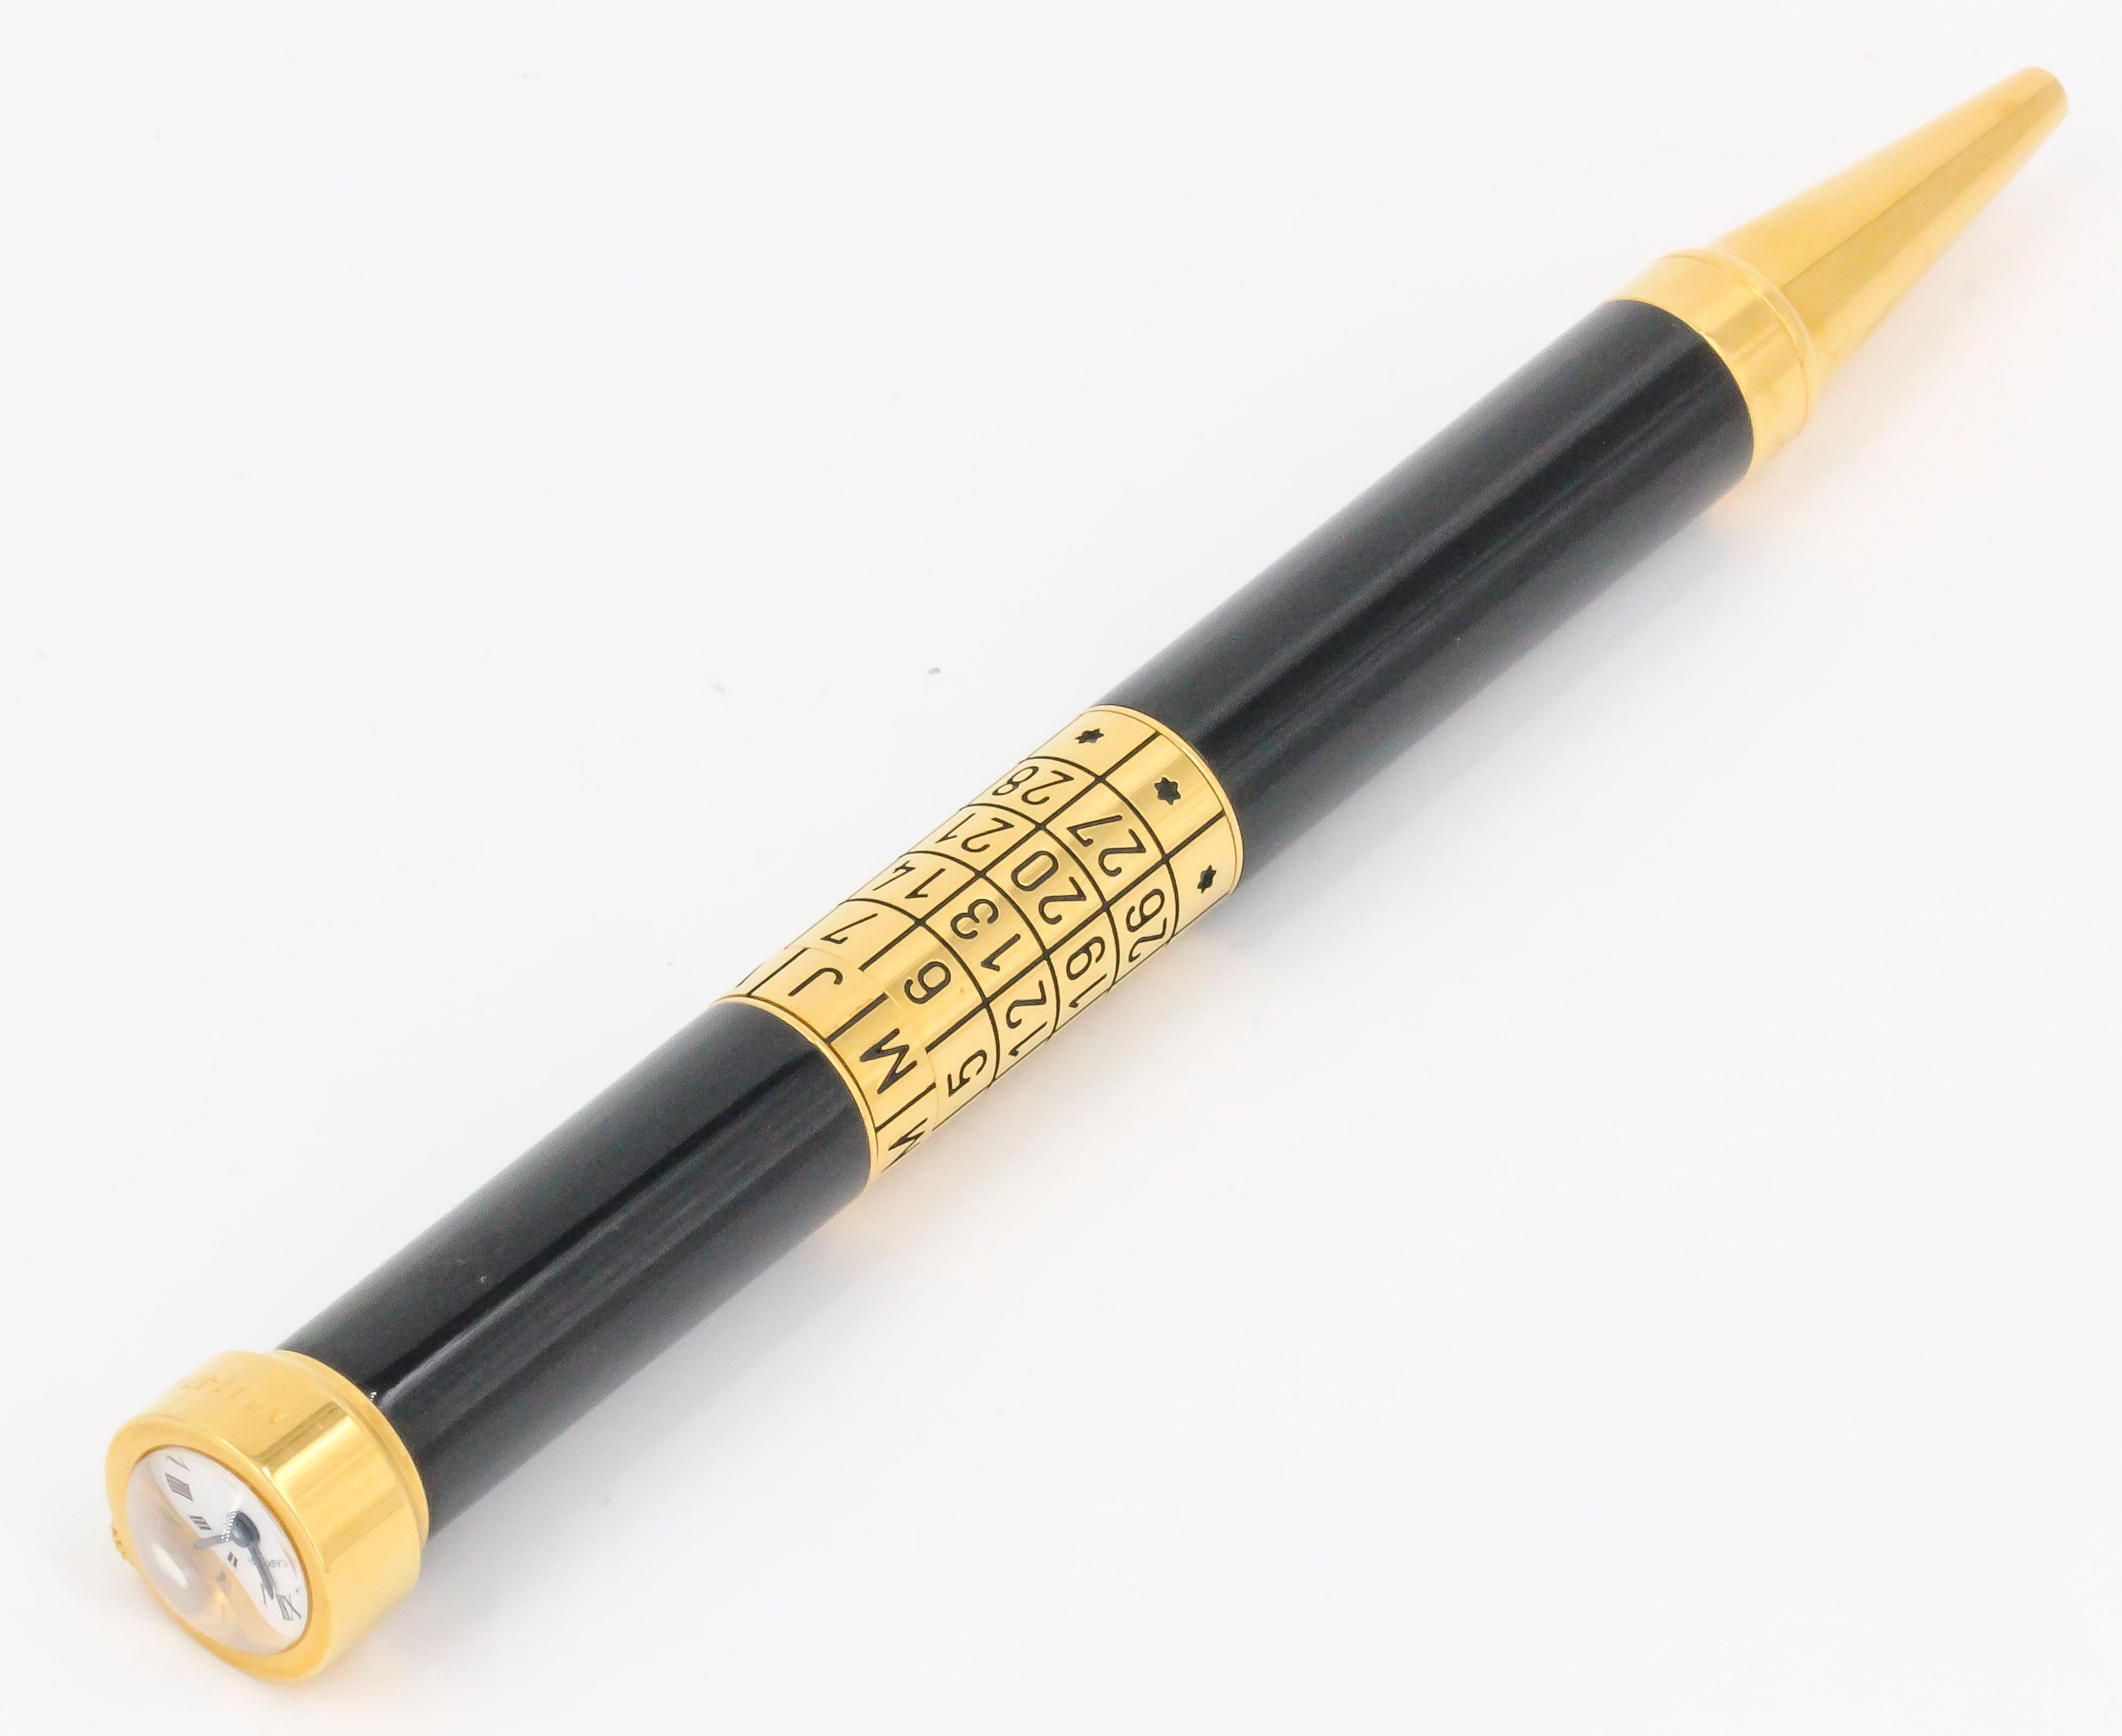 Handsome ballpoint watch and perpetual calendar pen by Cartier. Limited edition #1147 of 2000. Features an adjustable calendar along its main body, as well as a quartz clock on the end, with Roman numerals. Gold plated. Beautifully made, with